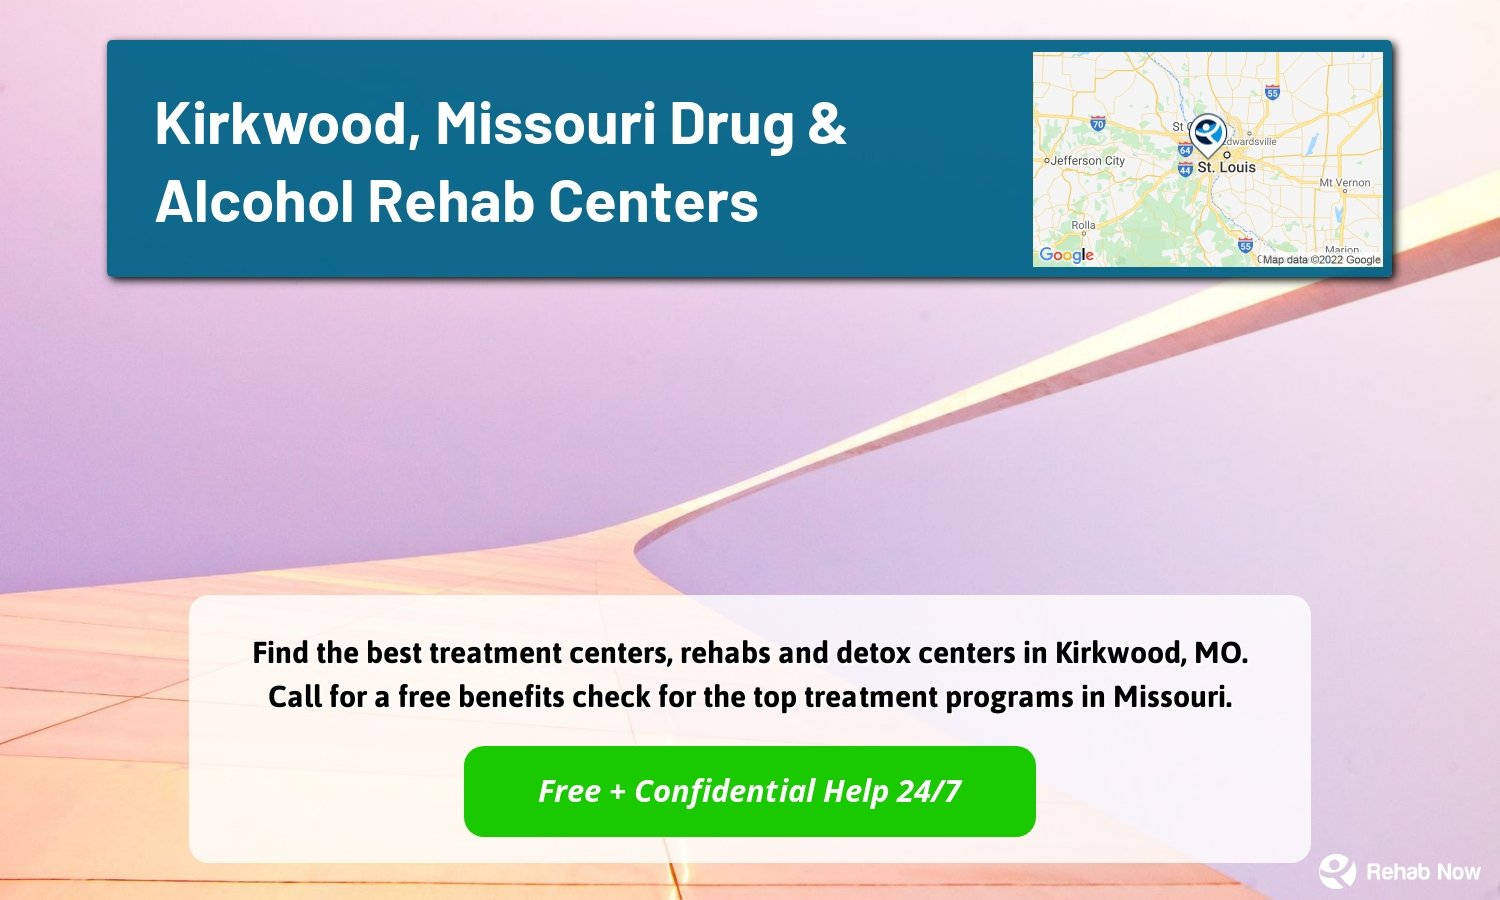 Find the best treatment centers, rehabs and detox centers in Kirkwood, MO. Call for a free benefits check for the top treatment programs in Missouri.